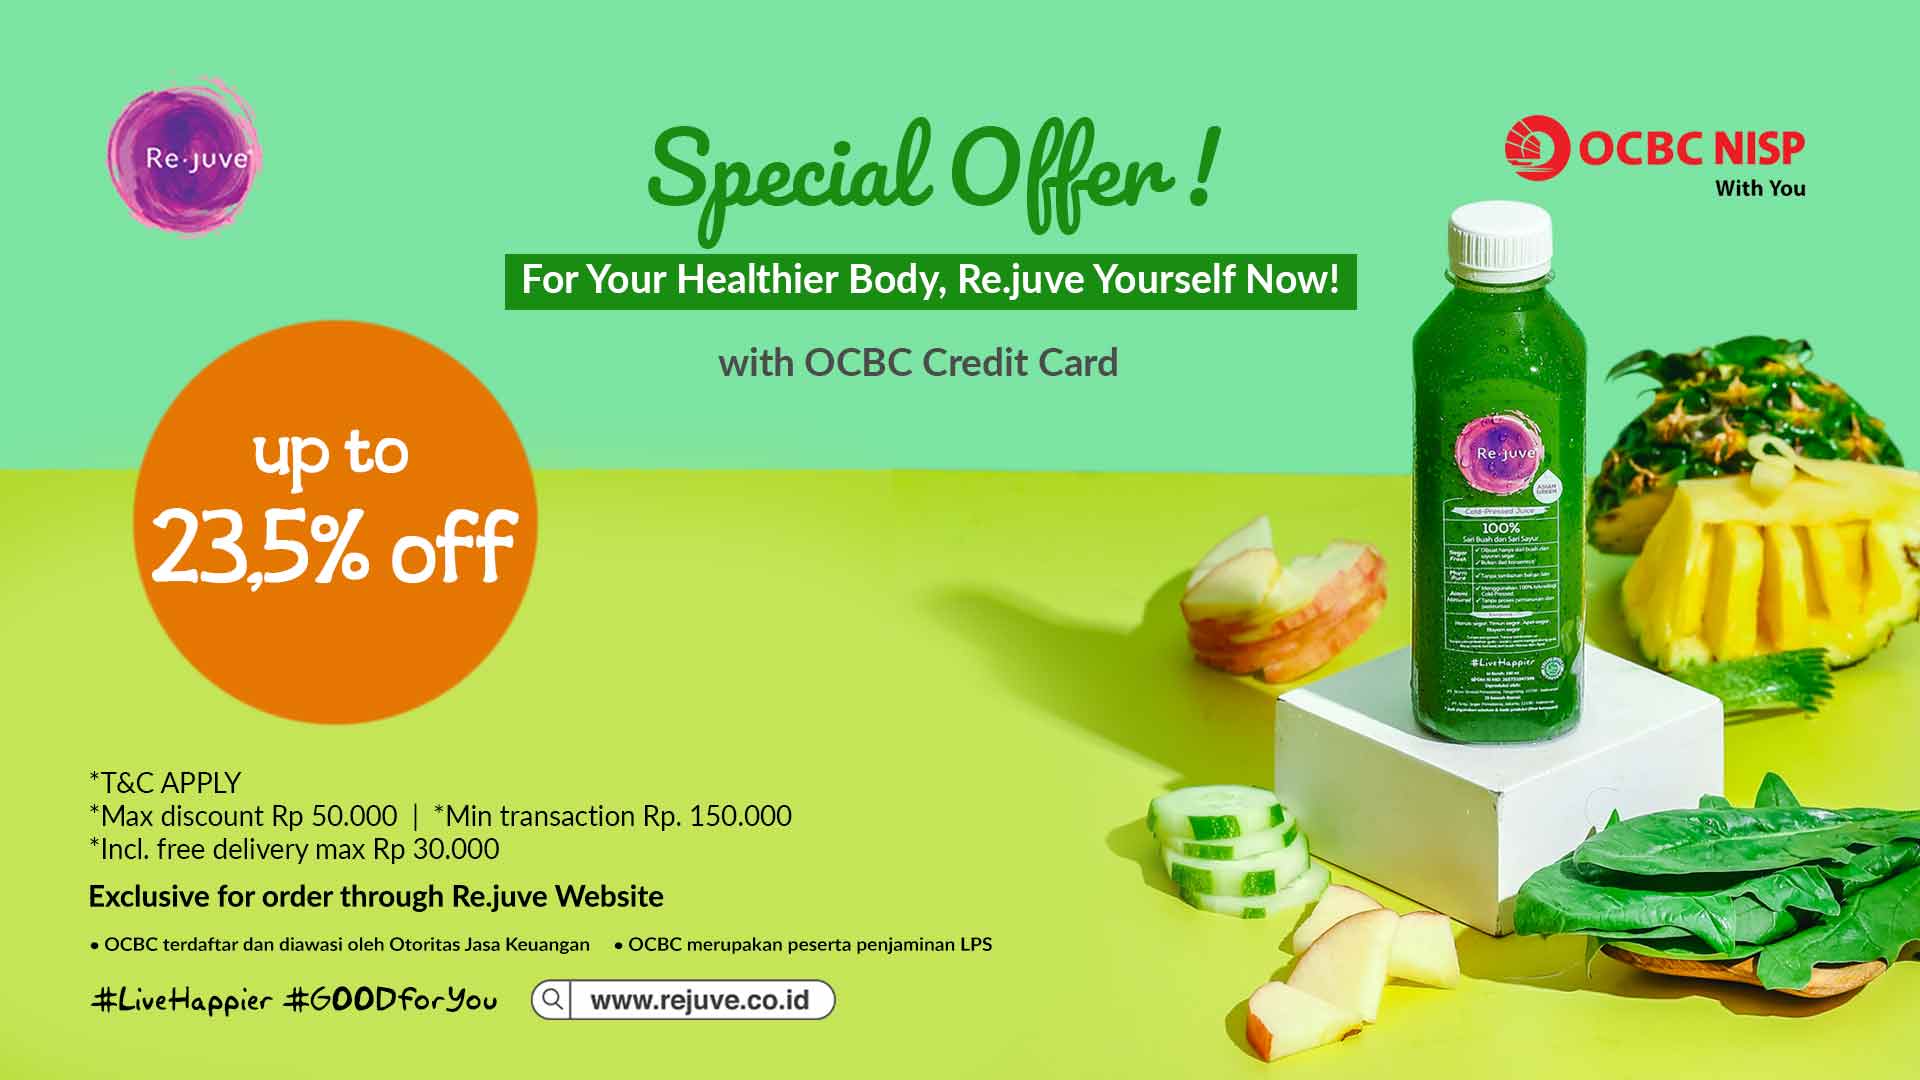 ocbc special offer